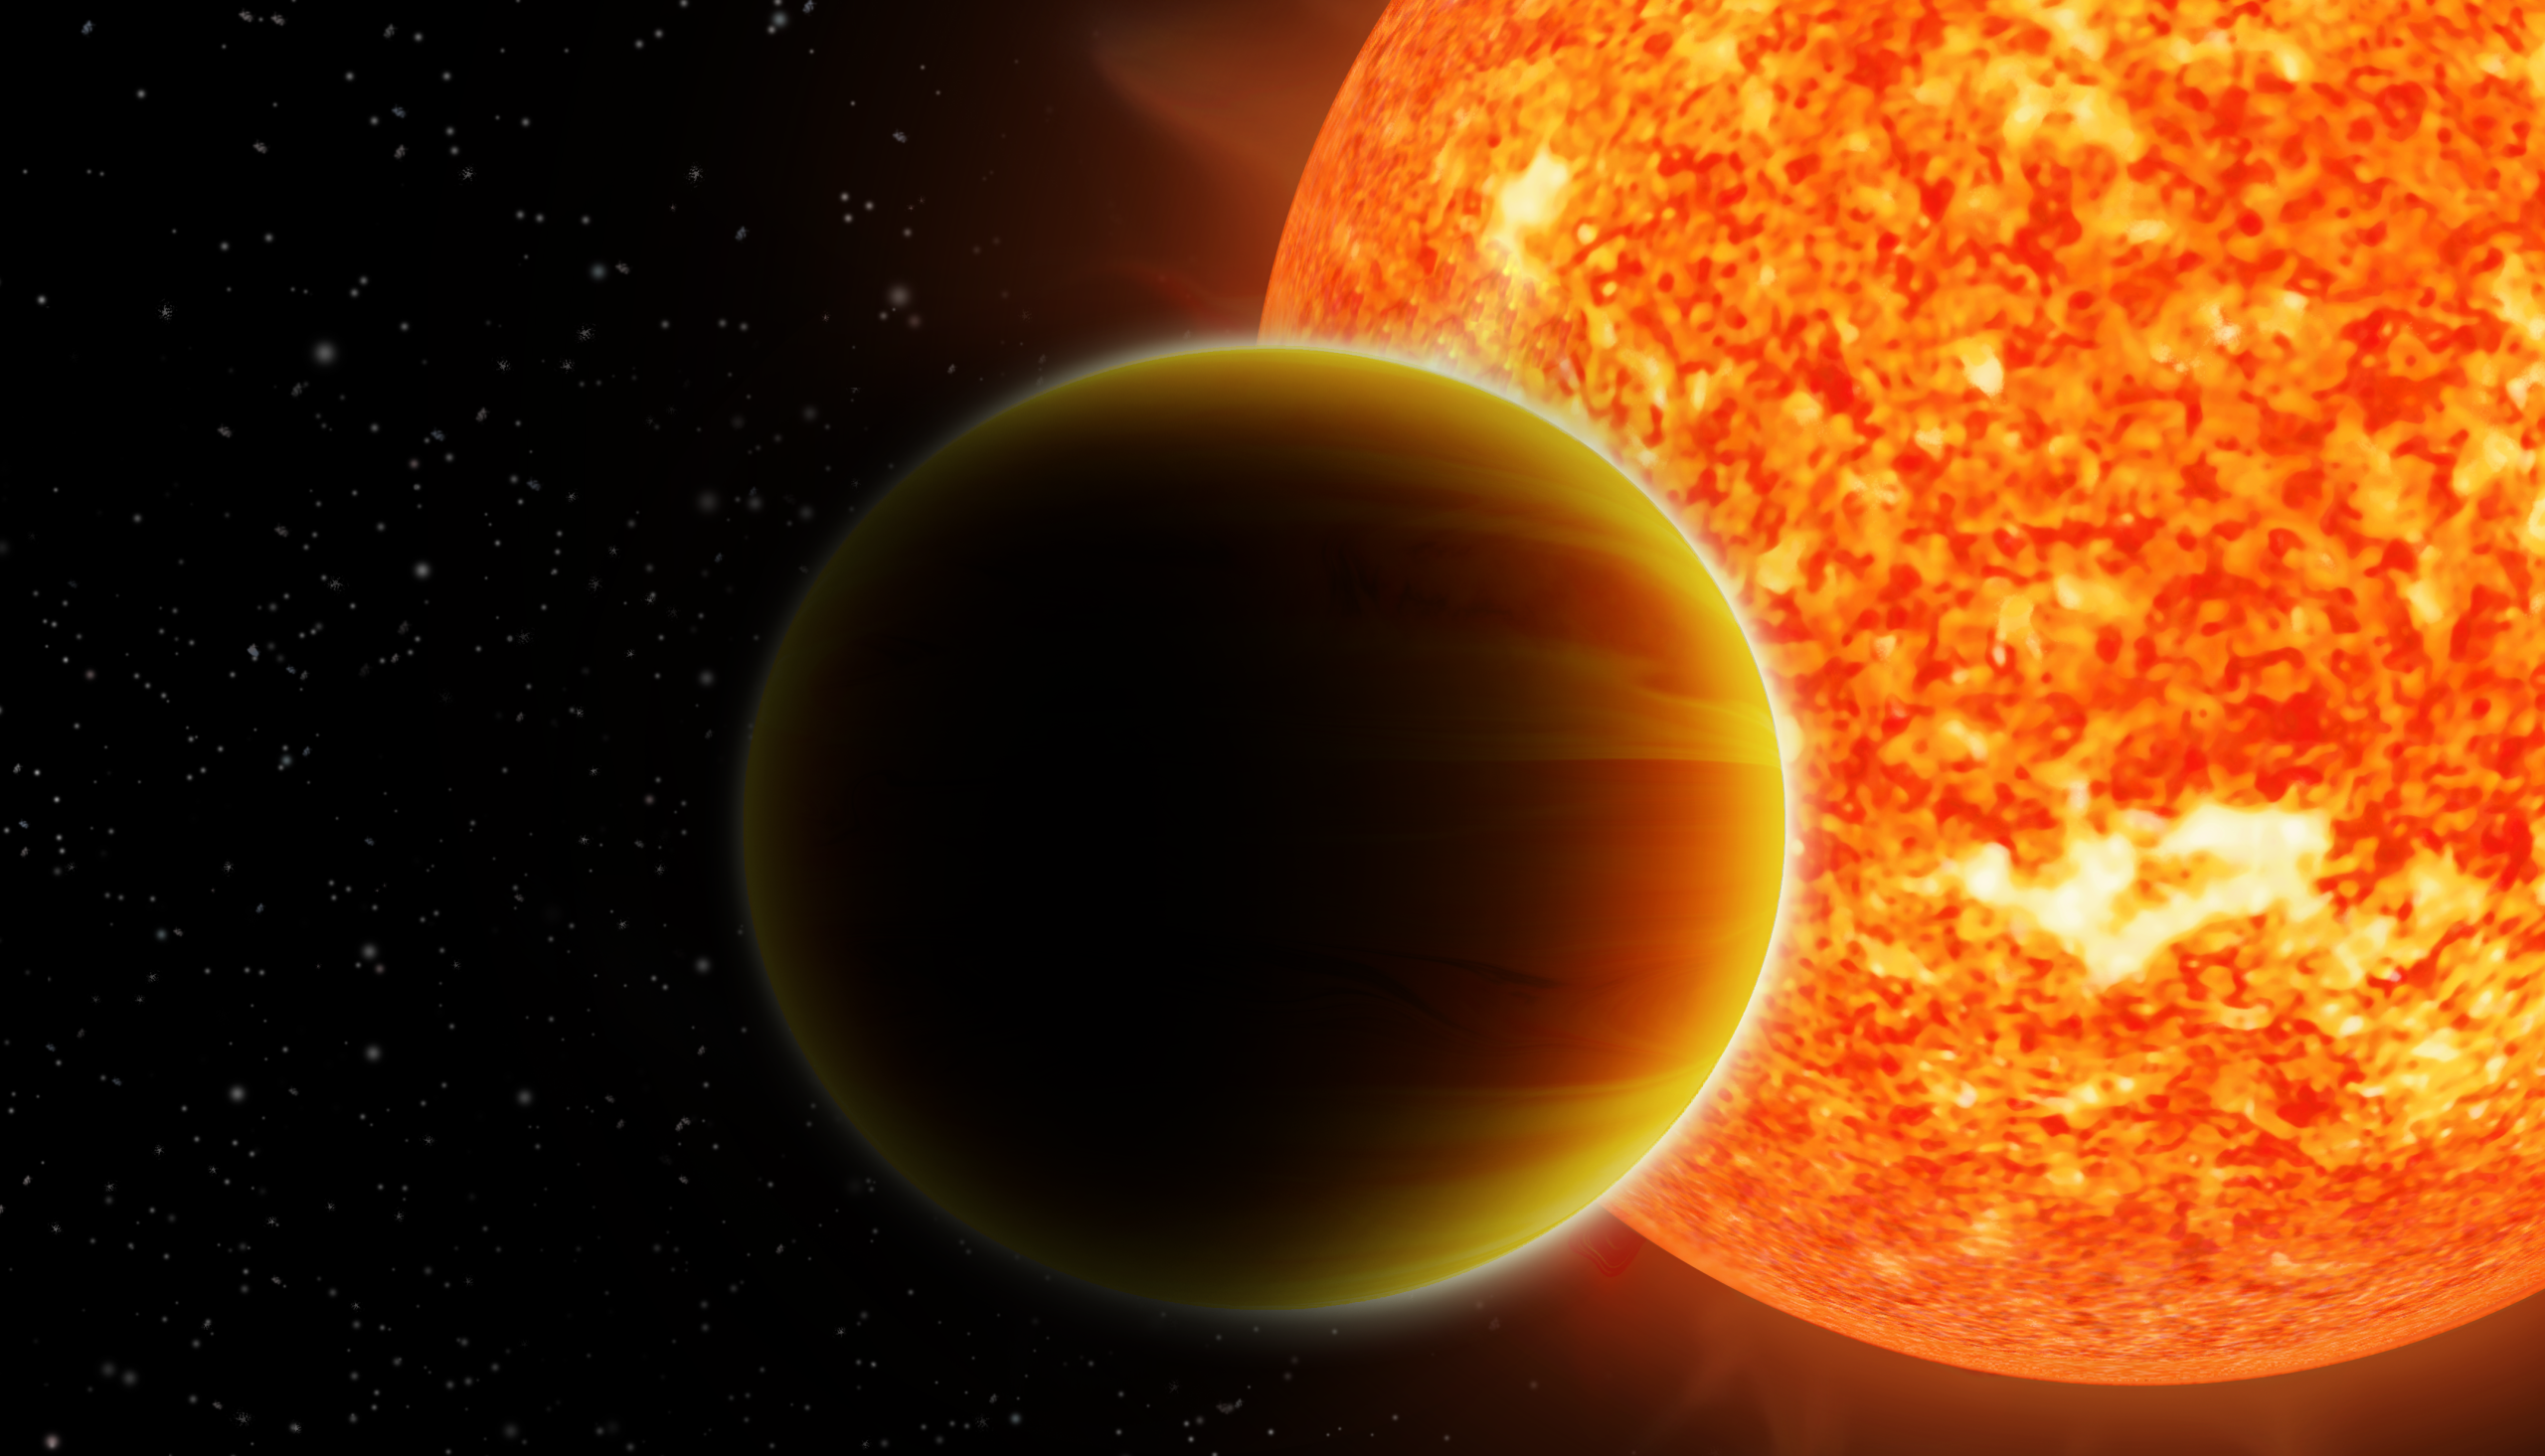 Astronomers have discovered a ultra hot Jupiter with extreme conditions. Credit: Haven Giguere, Nikku Madhusudhan